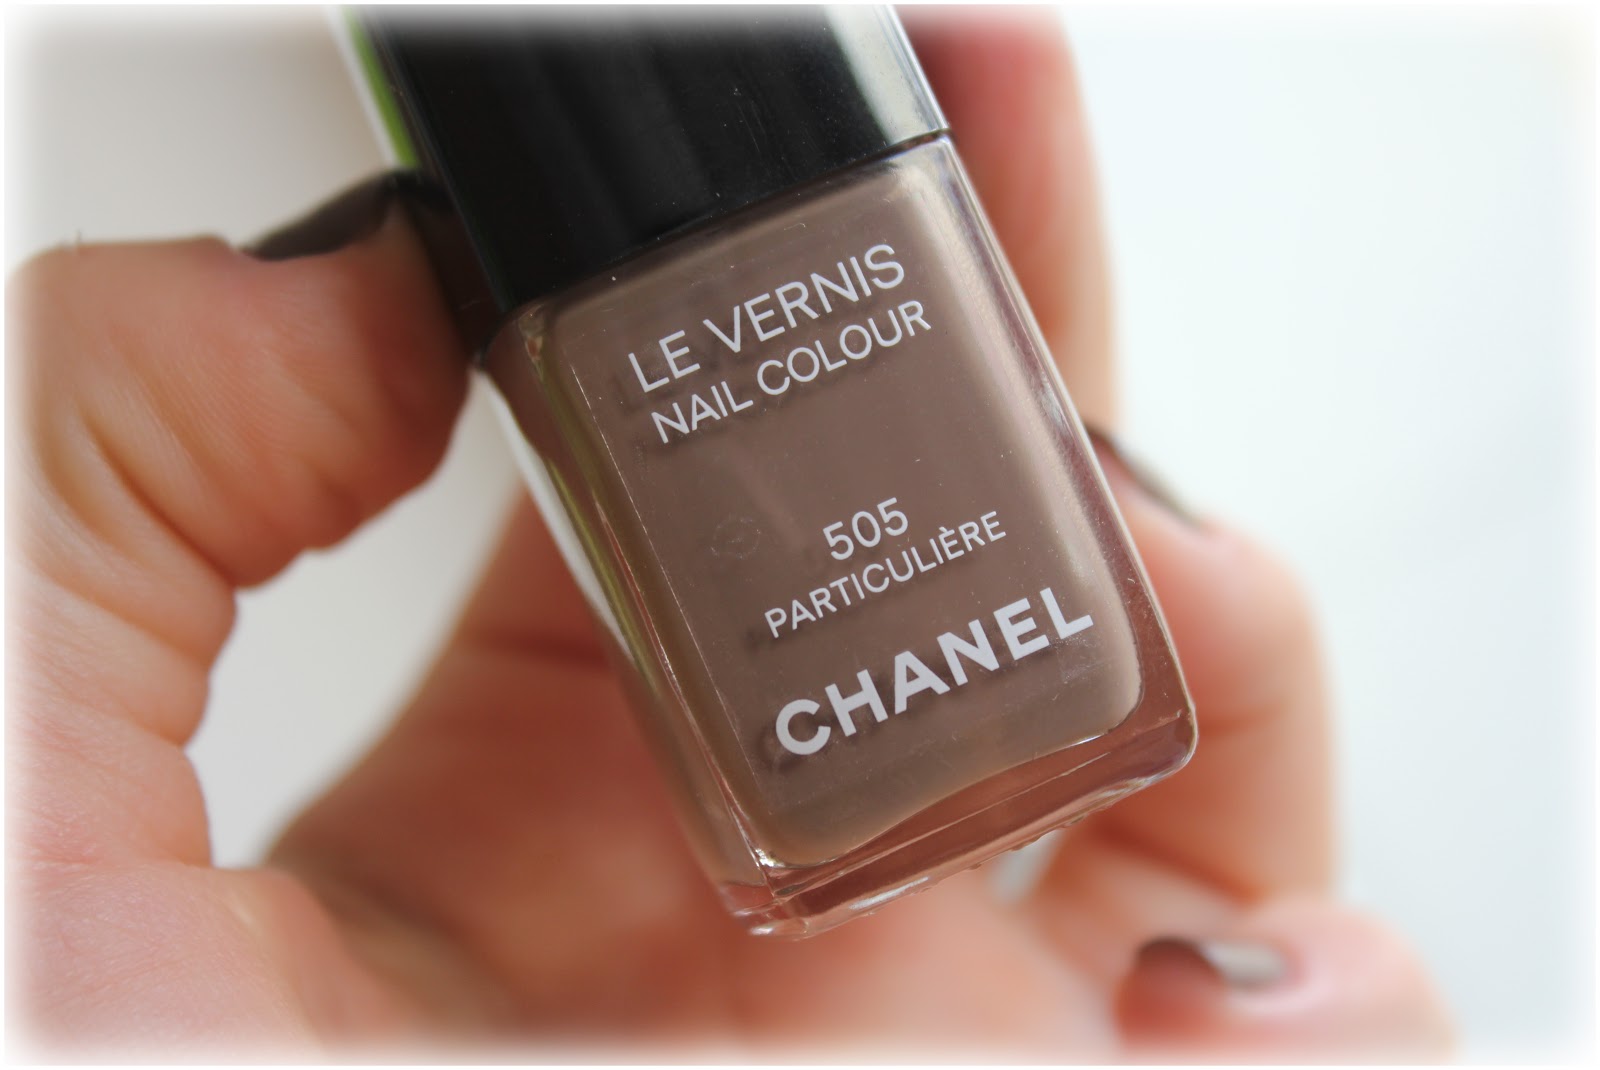 Chanel Le Vernis Longwear Nail Colour in Particuliere - wide 9